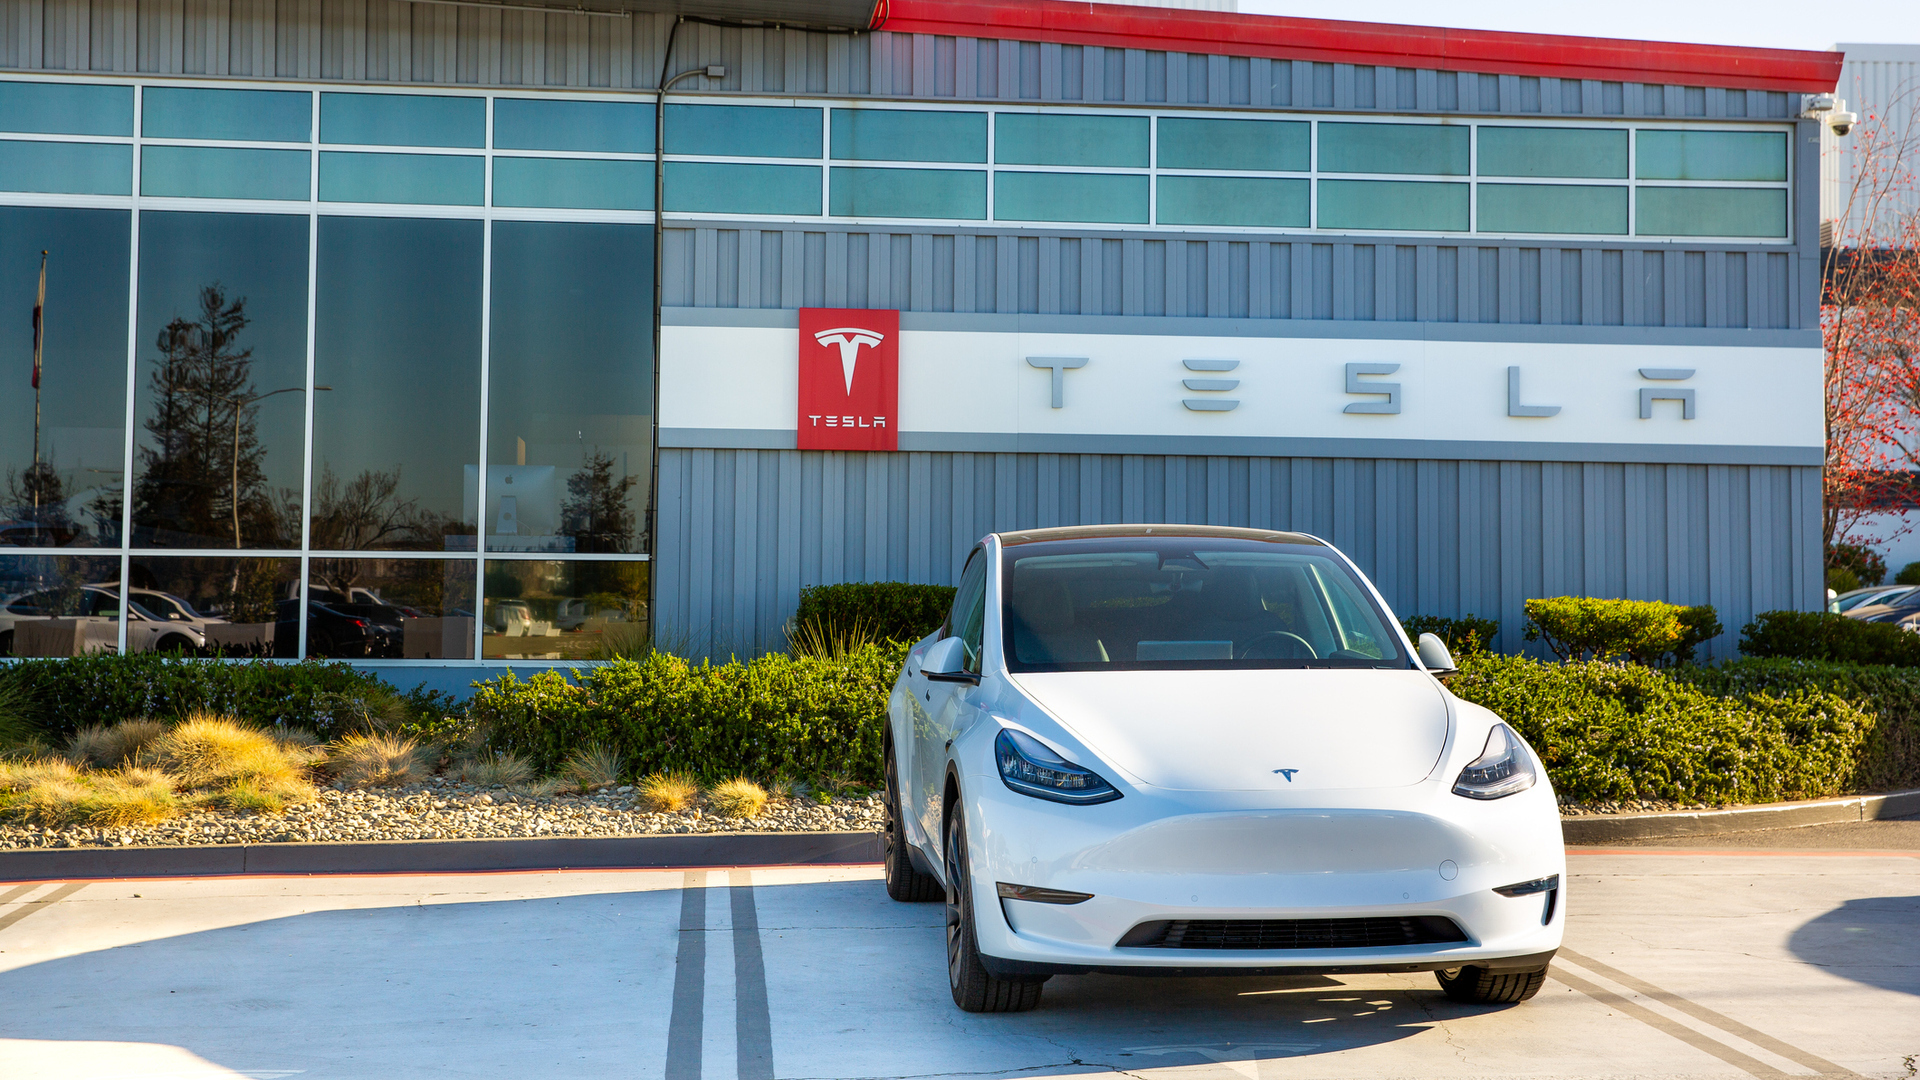 Tesla's Stock Slump: What's Behind the Electric Giant's Latest Challenges?